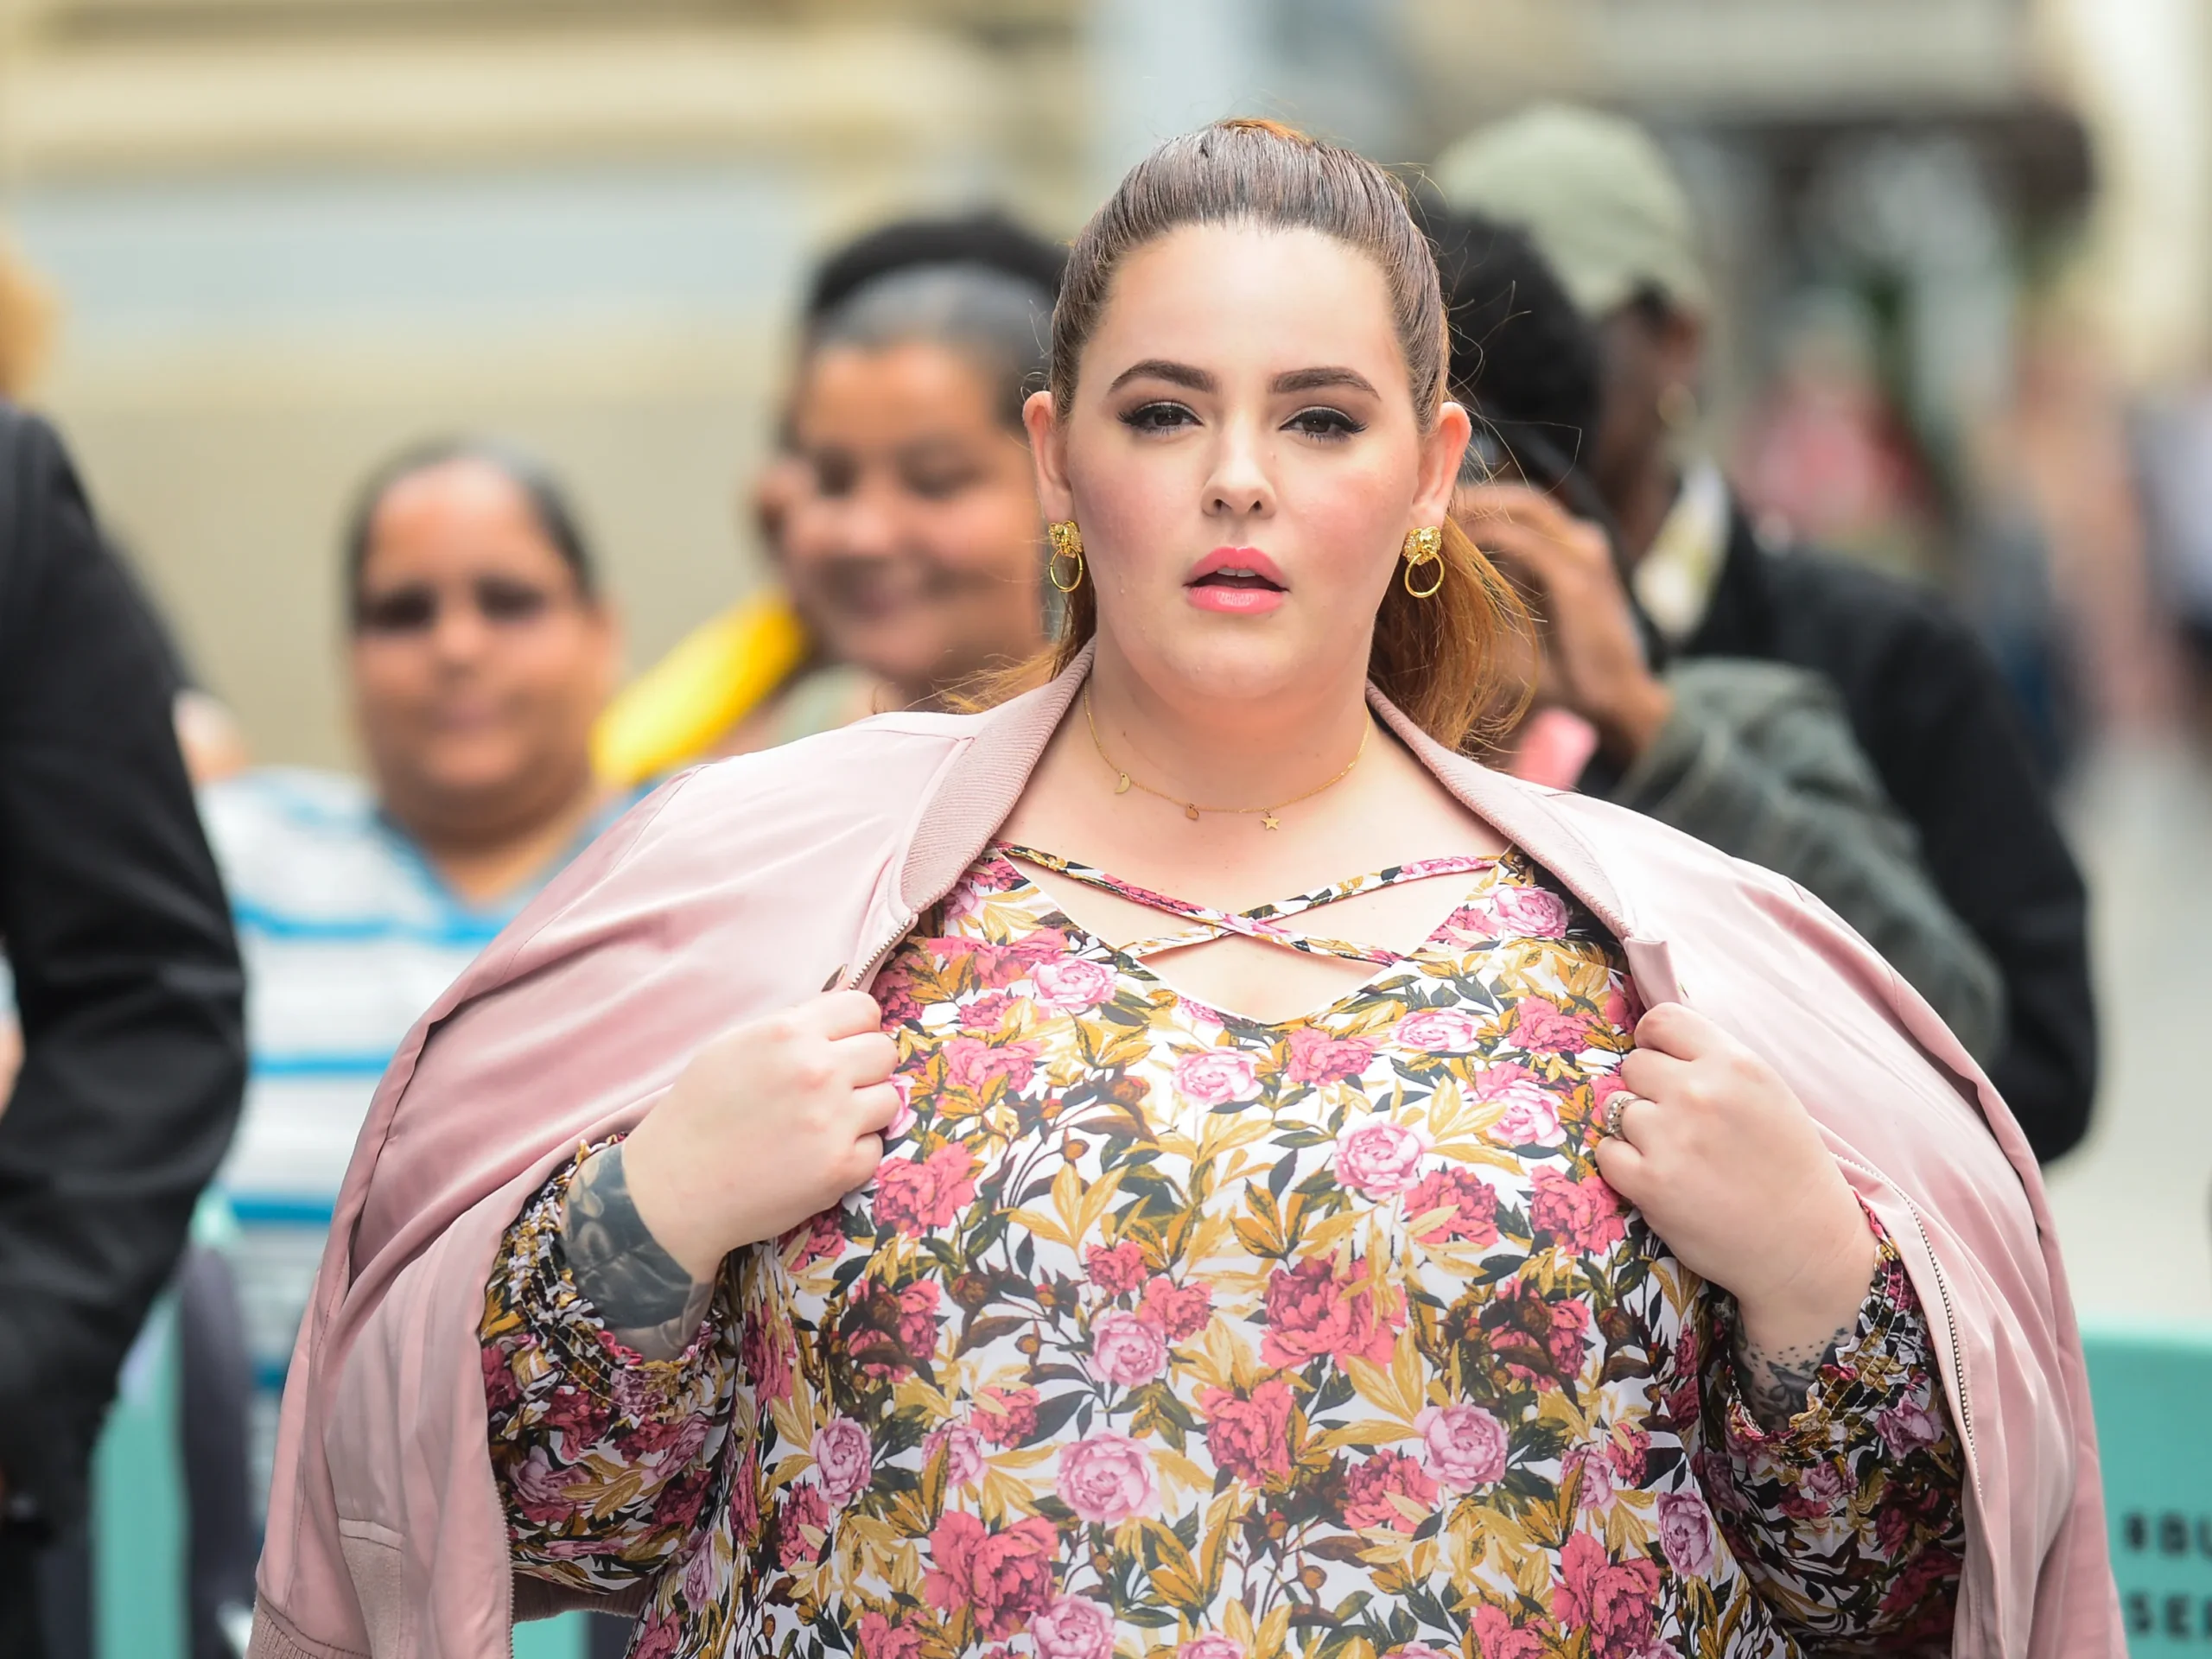 Tess Holliday Net Worth 2023-Biography, Age, Height, Husband, Weight